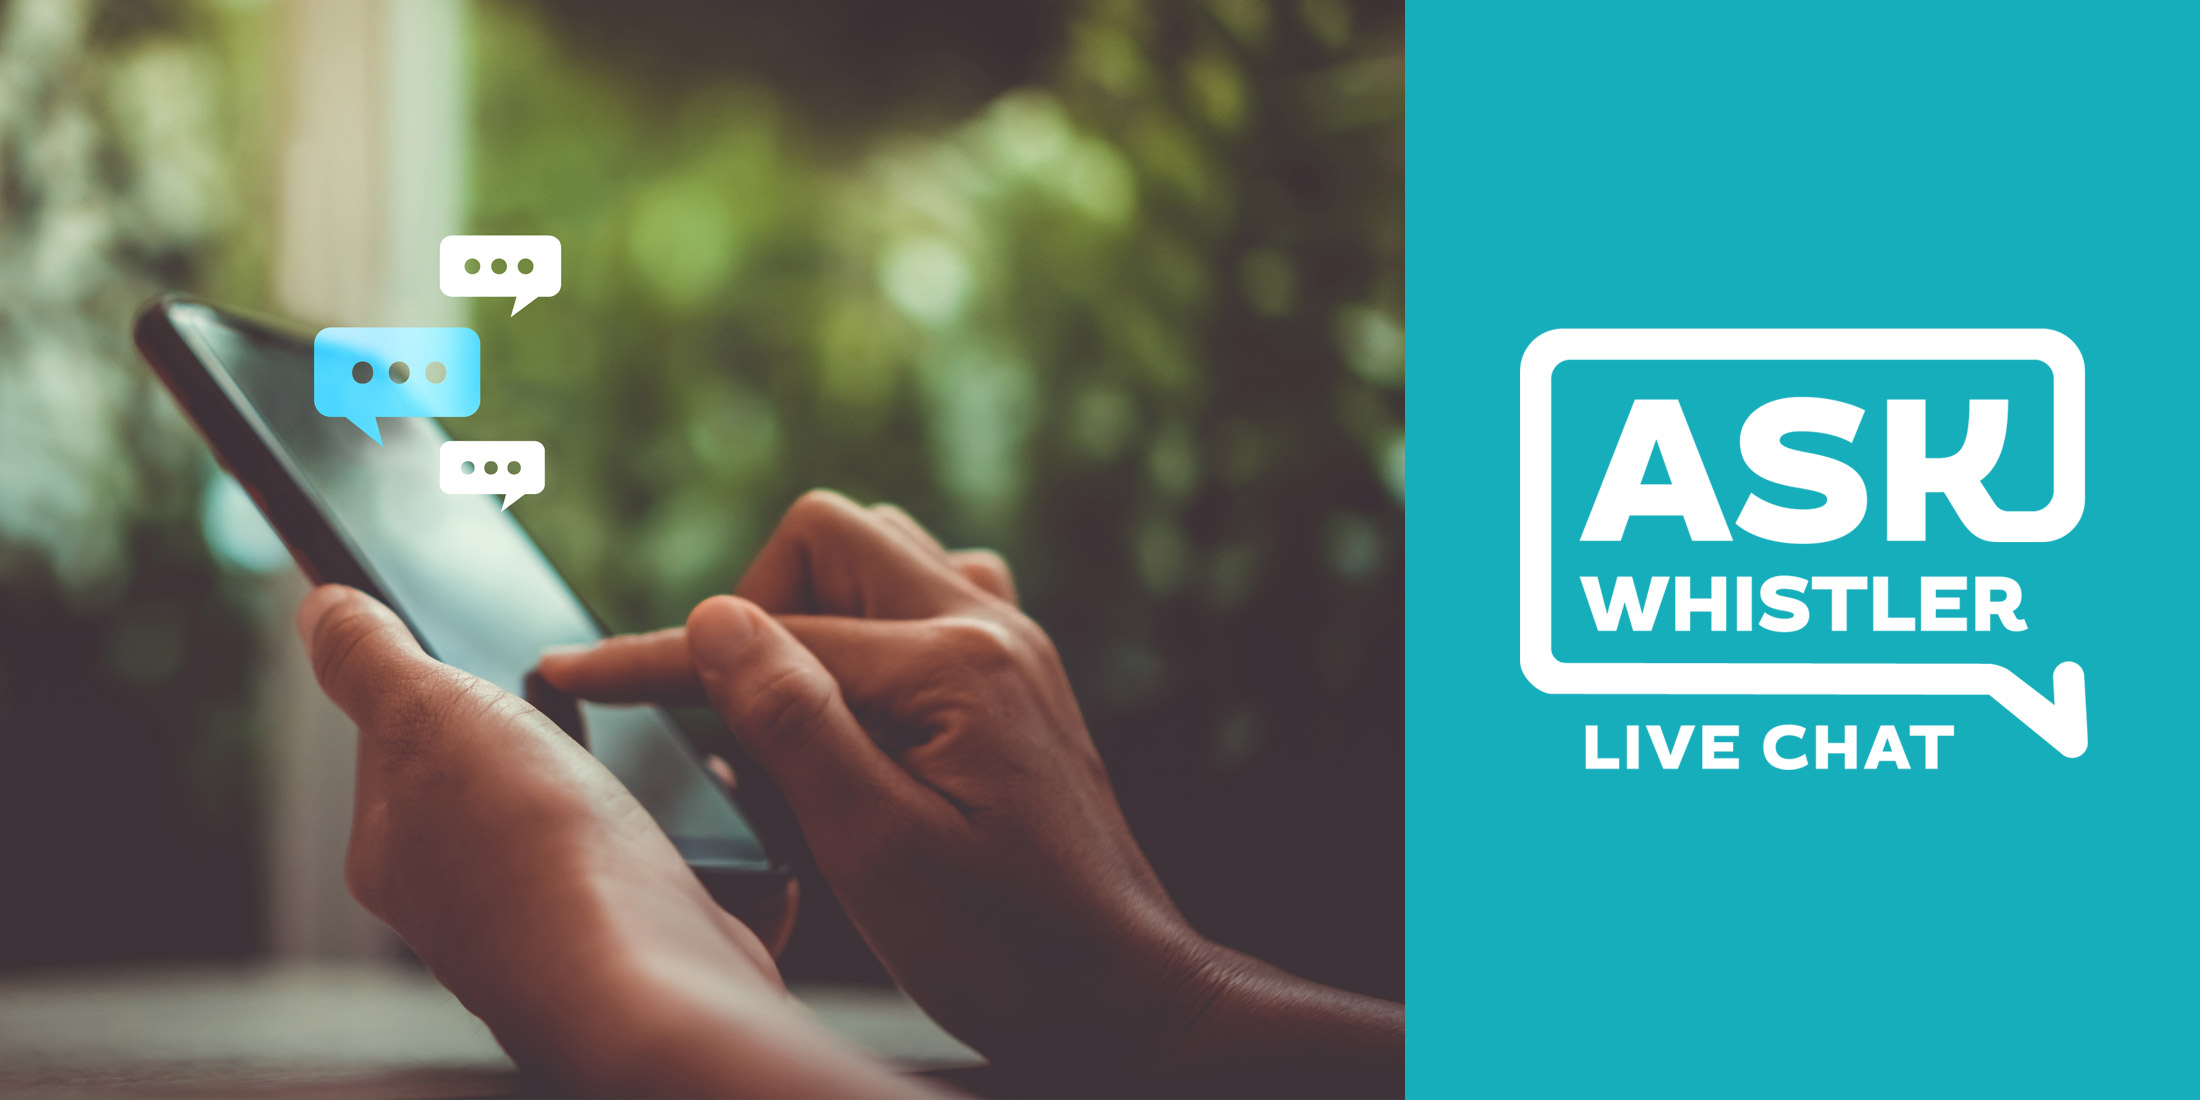 Ask Whistler is our mobile live chat, so ask us anything!